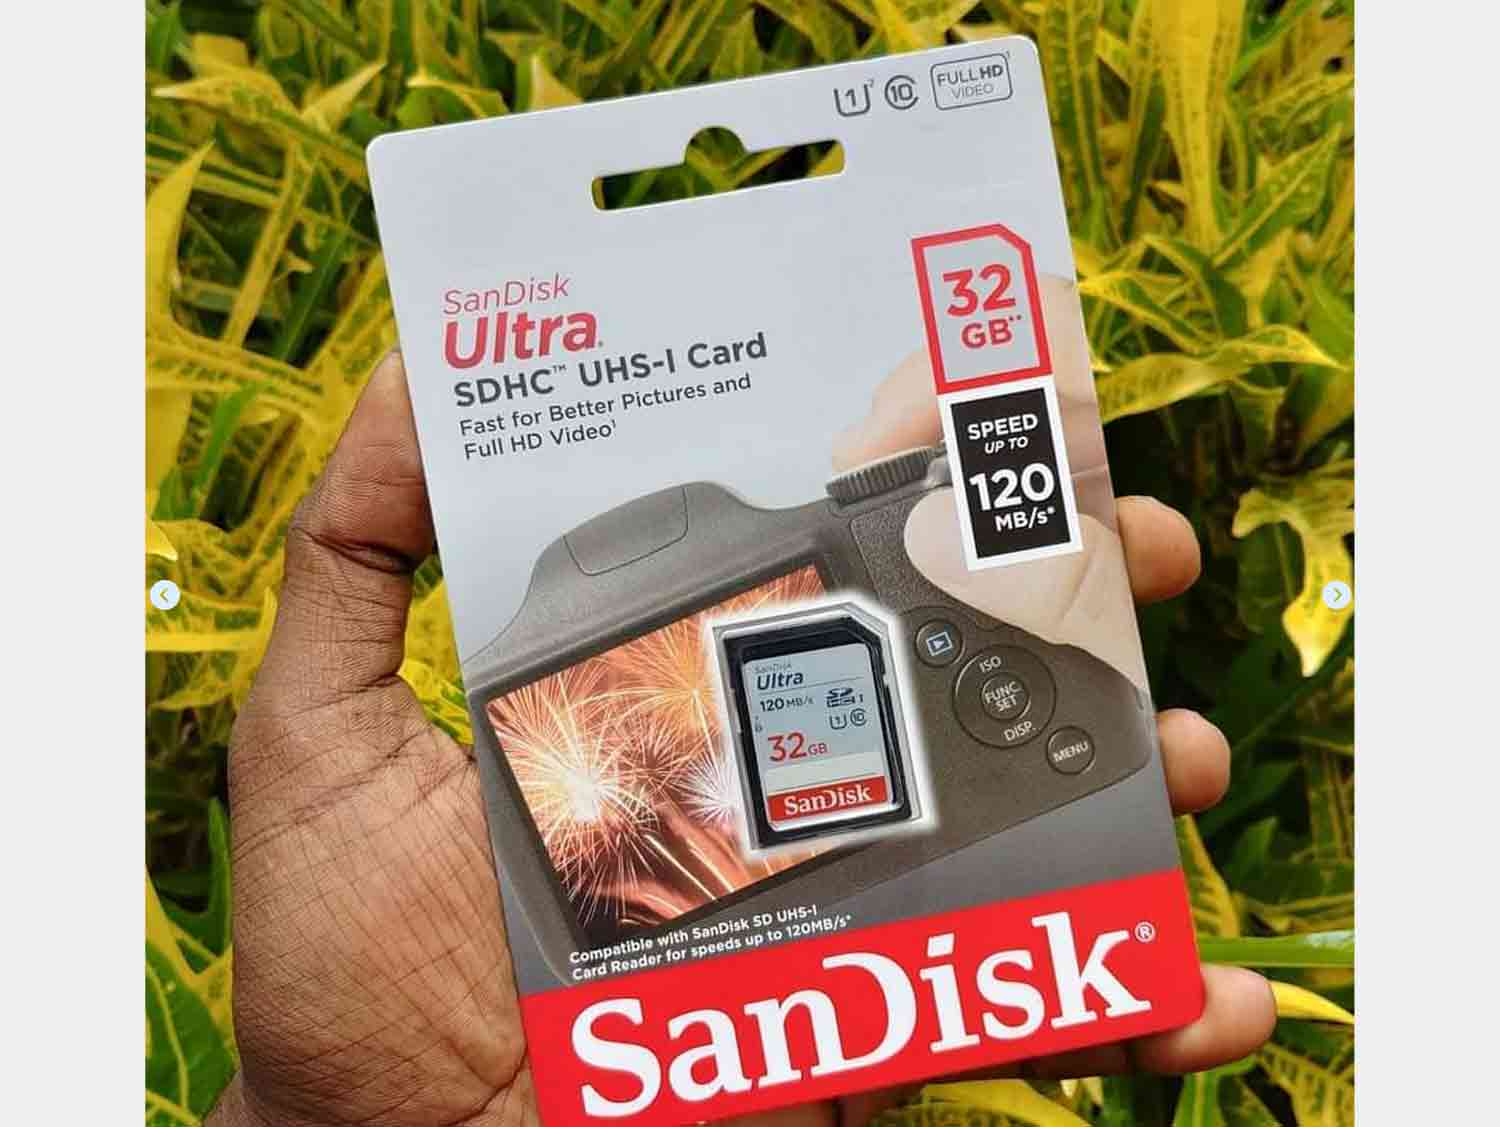 SanDisk Ultra SDHC UHS-I Card 32GB 120MB/s